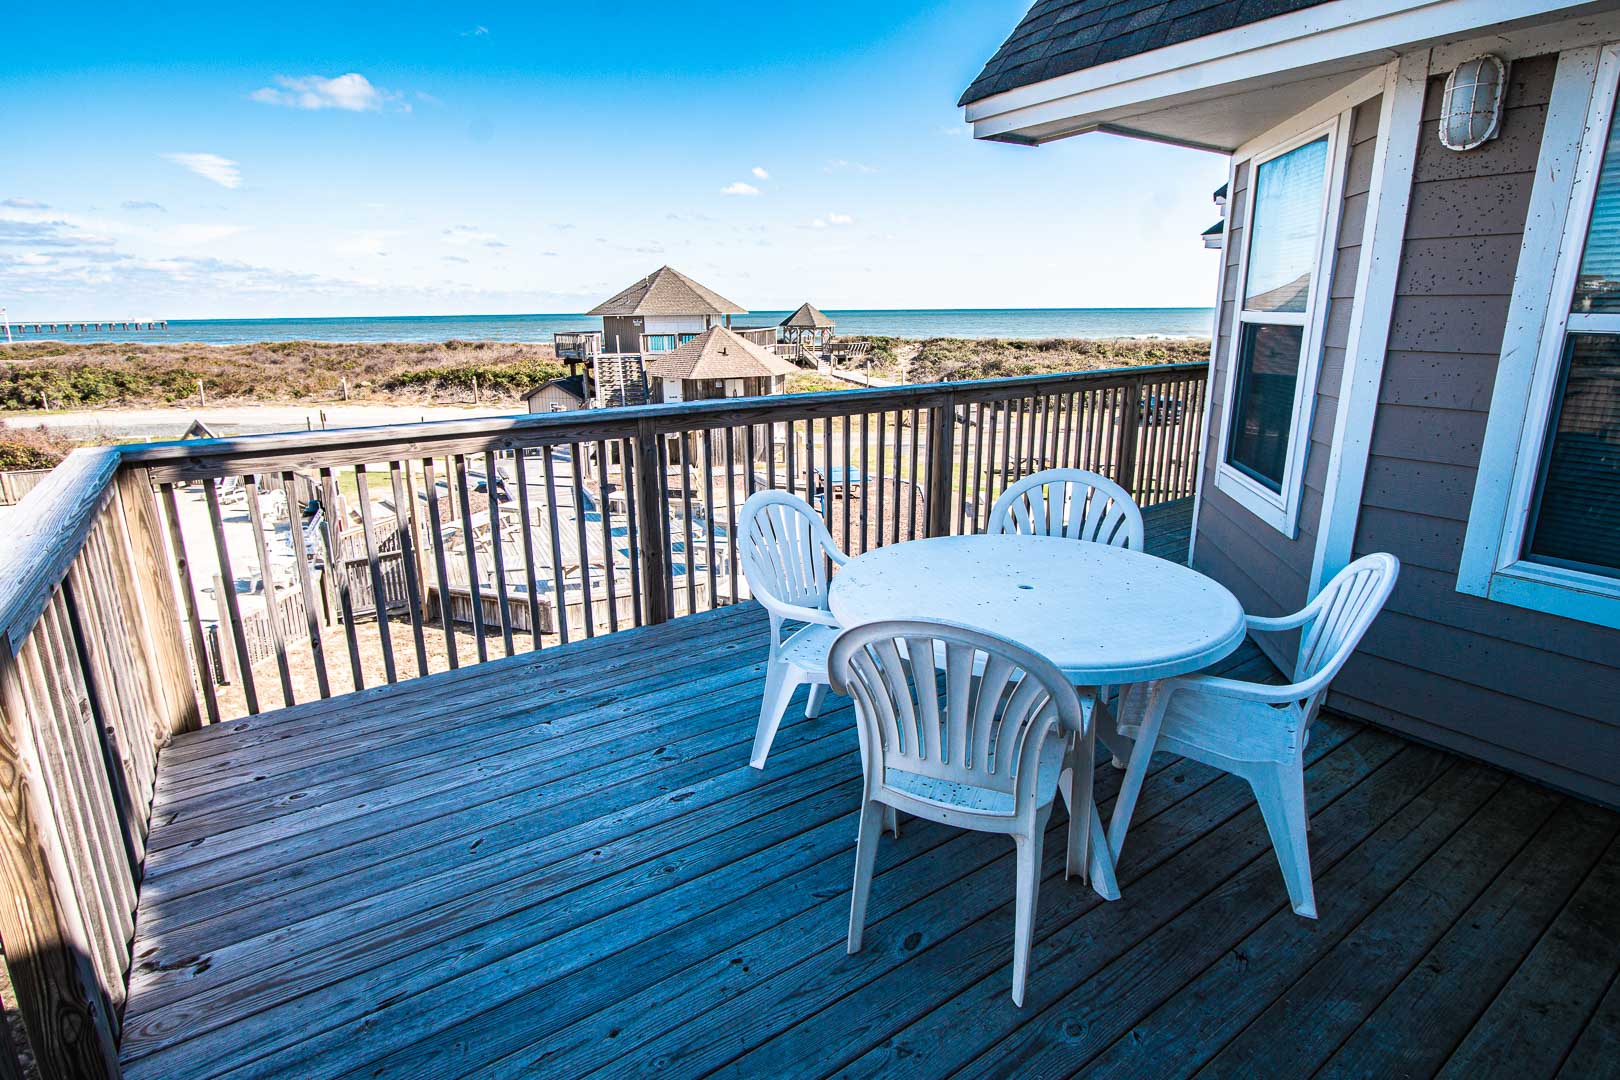 A scenic view from the patio deck at VRI's Barrier Island Station in North Carolina.